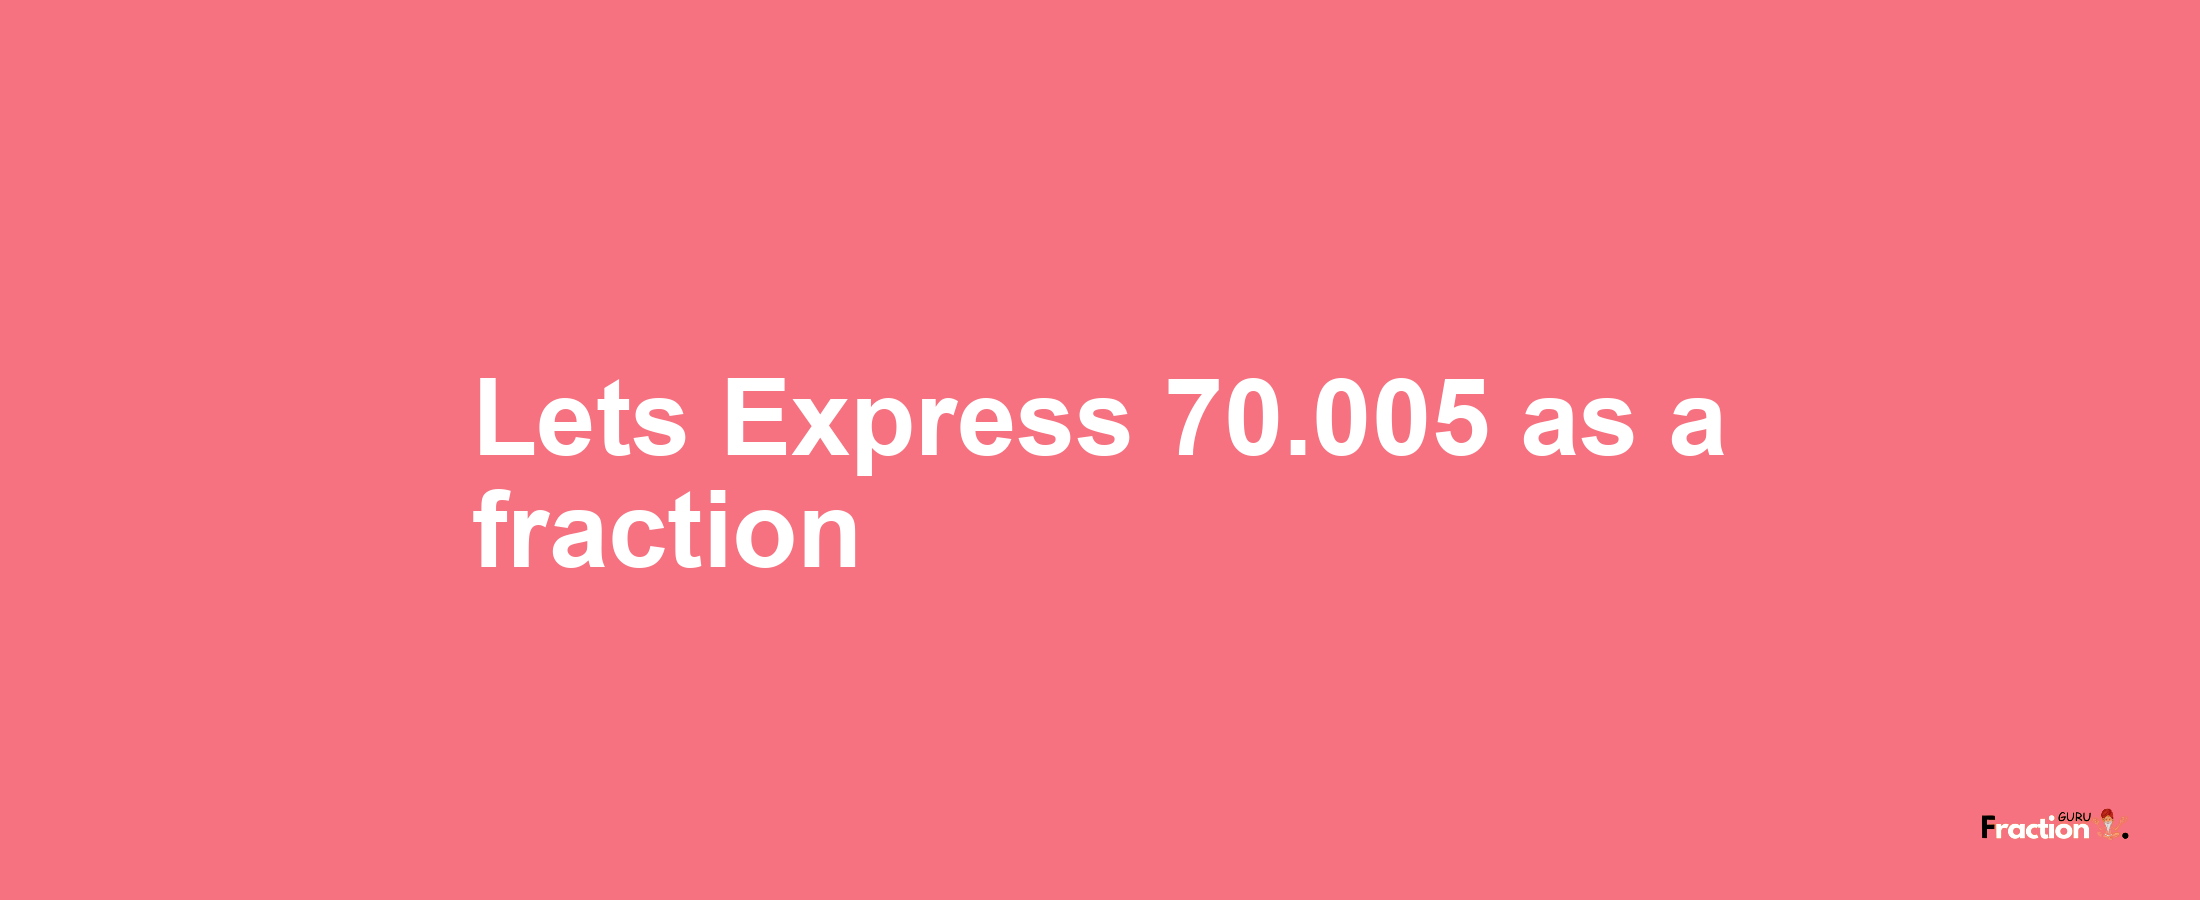 Lets Express 70.005 as afraction